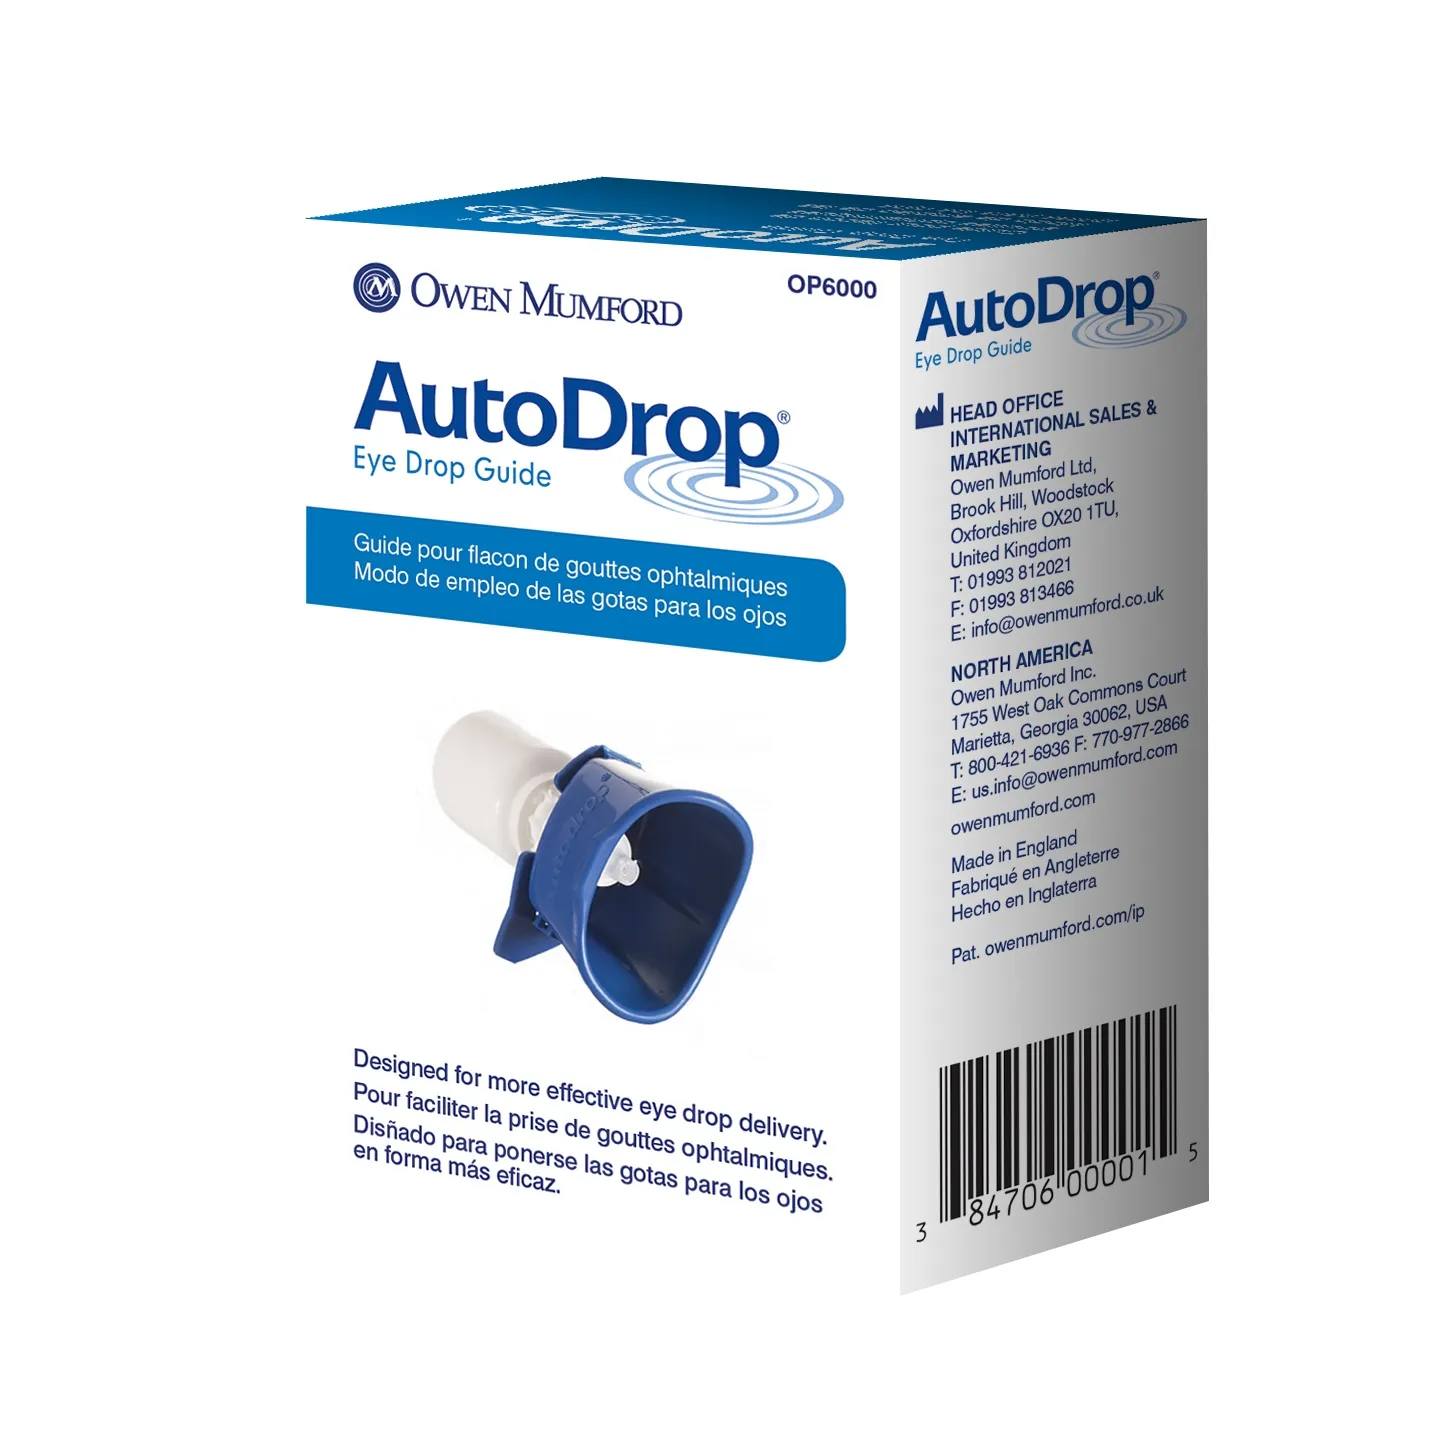 Owen Mumford - Op6000 - Autodrop Eye Opener. Clips Onto The Majority Of Eyedrop Bottles, Holds The Eye Open And Ensures Eyedrops Are Delivered Simply And Effectively Into The Correct Part Of The Eye.